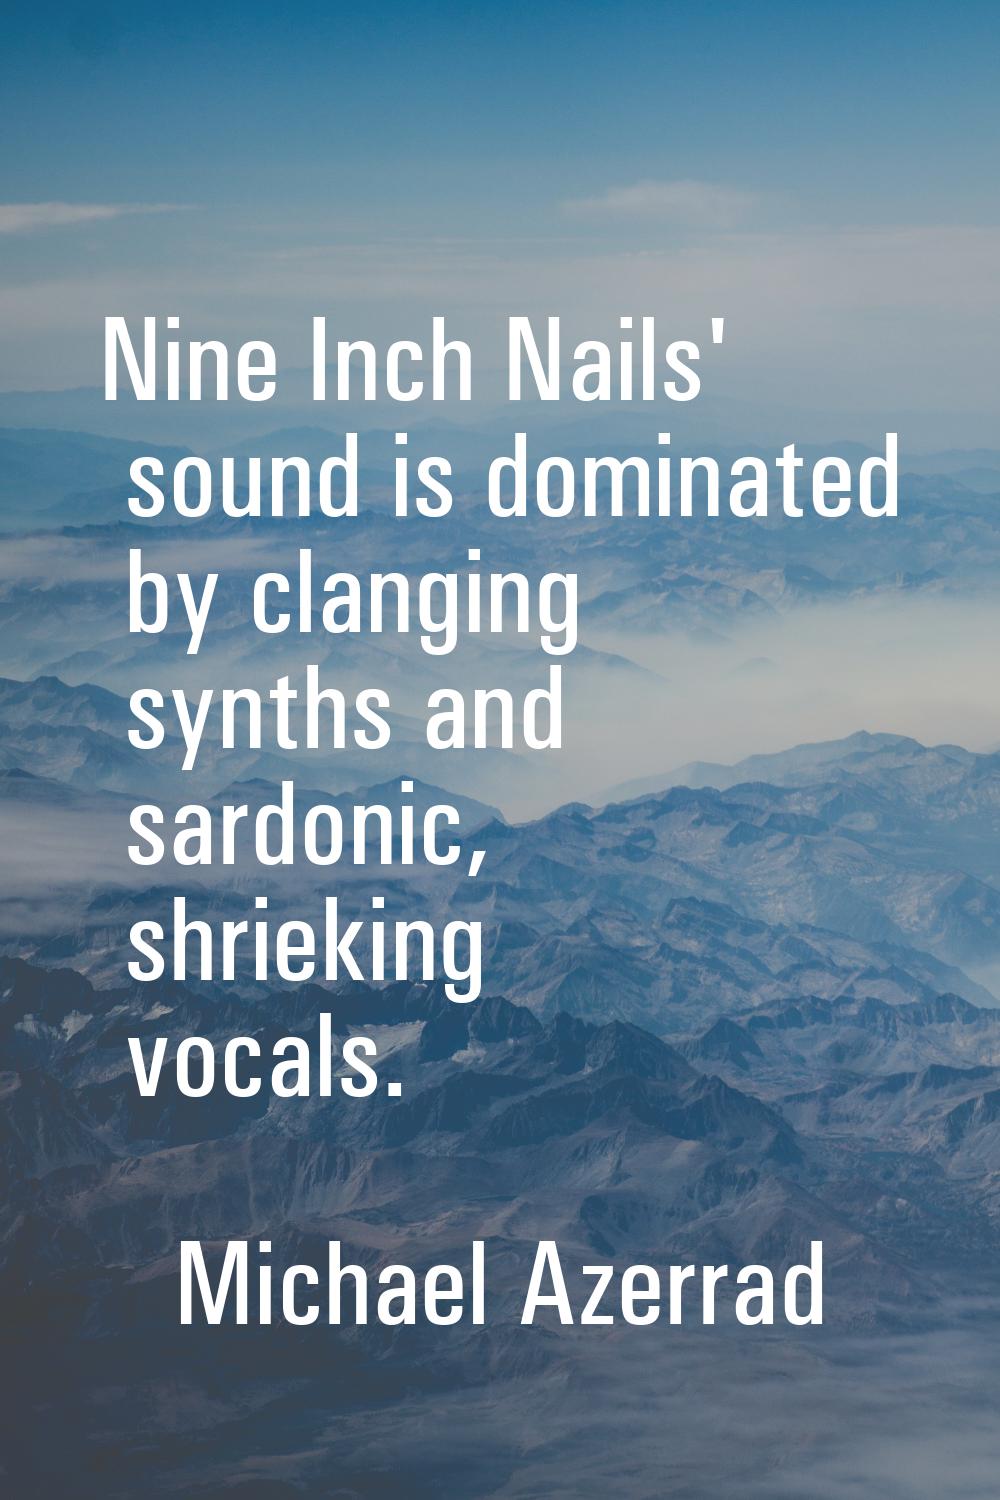 Nine Inch Nails' sound is dominated by clanging synths and sardonic, shrieking vocals.